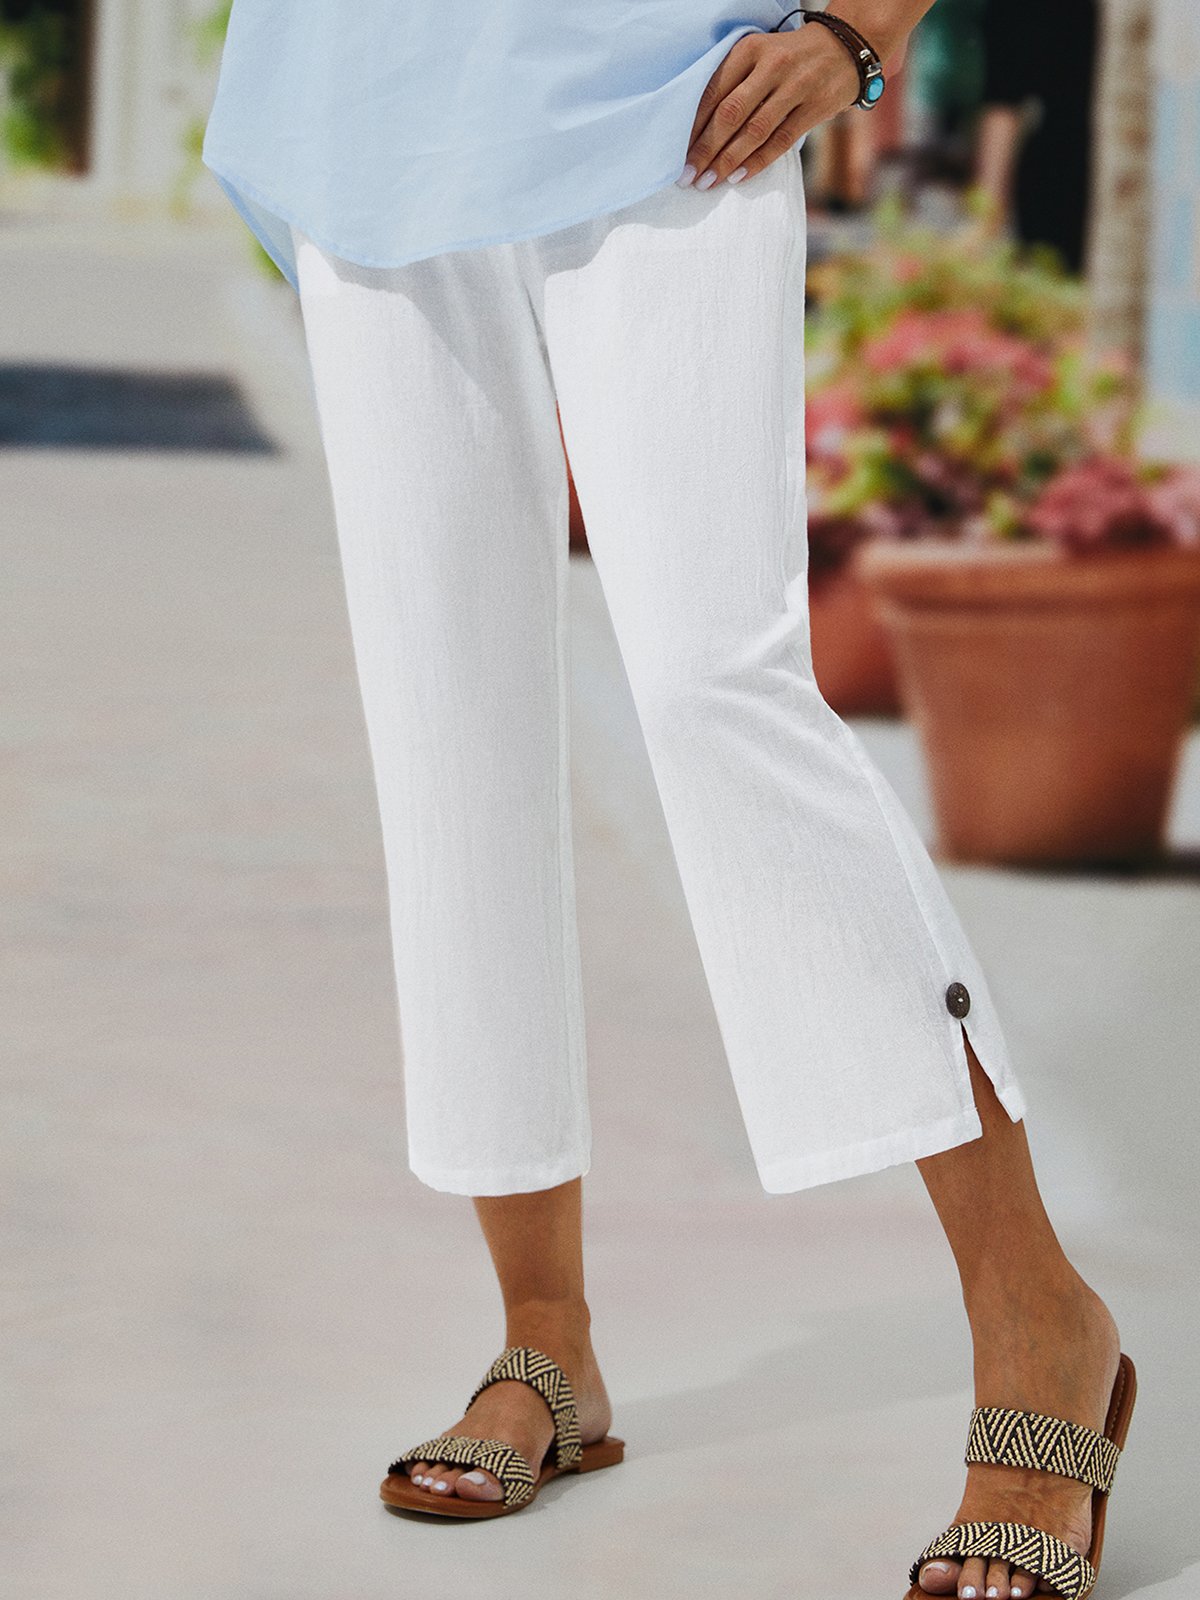 Loose Cotton Casual Pants